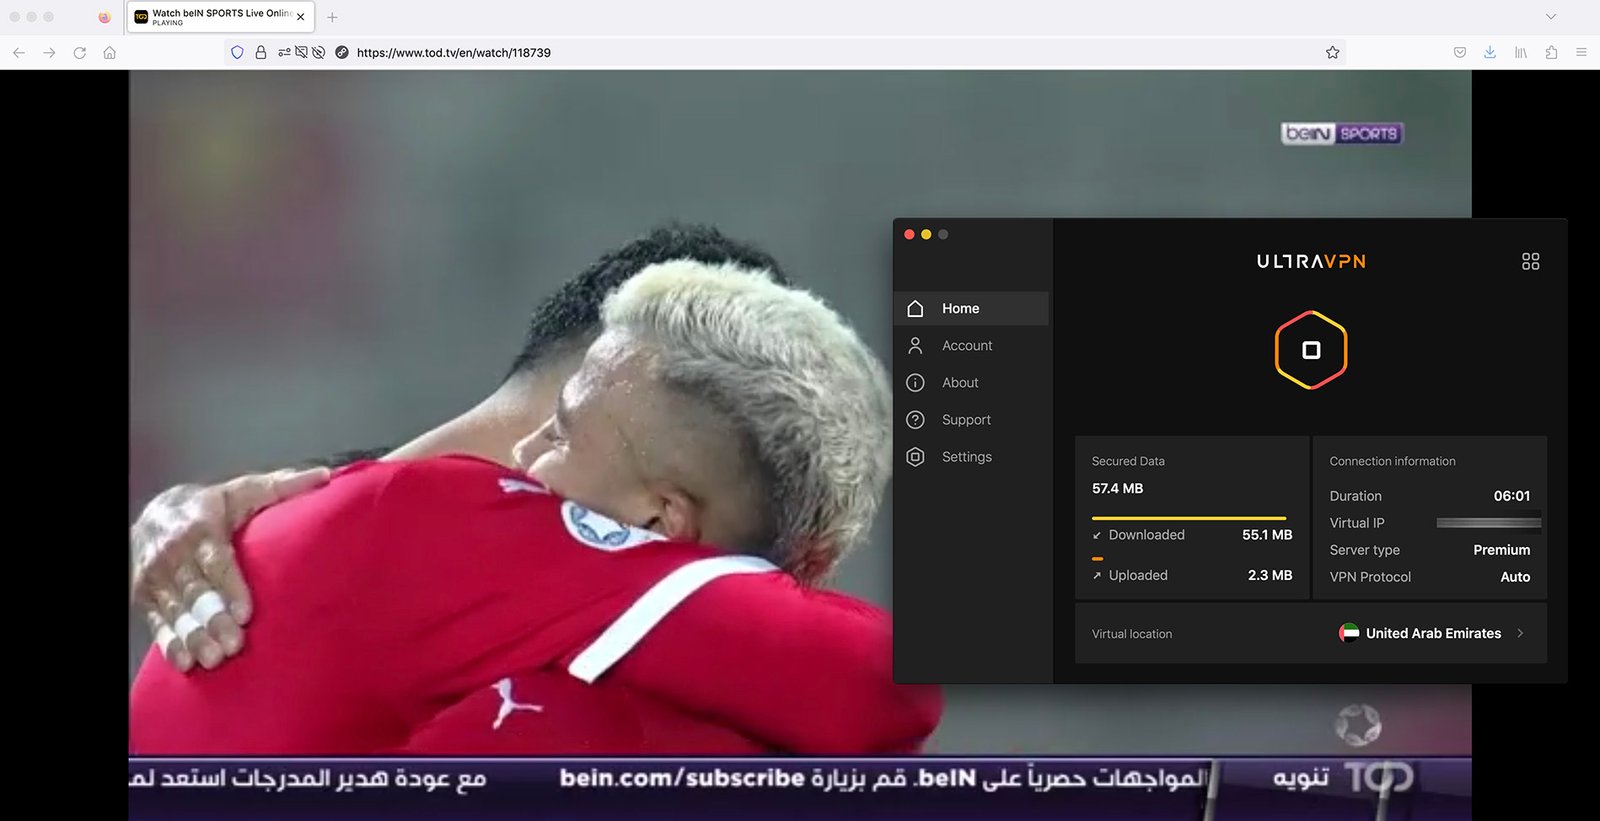 Watch TOD TV abroad - Streaming Free Live beIn Sports with UltraVPN